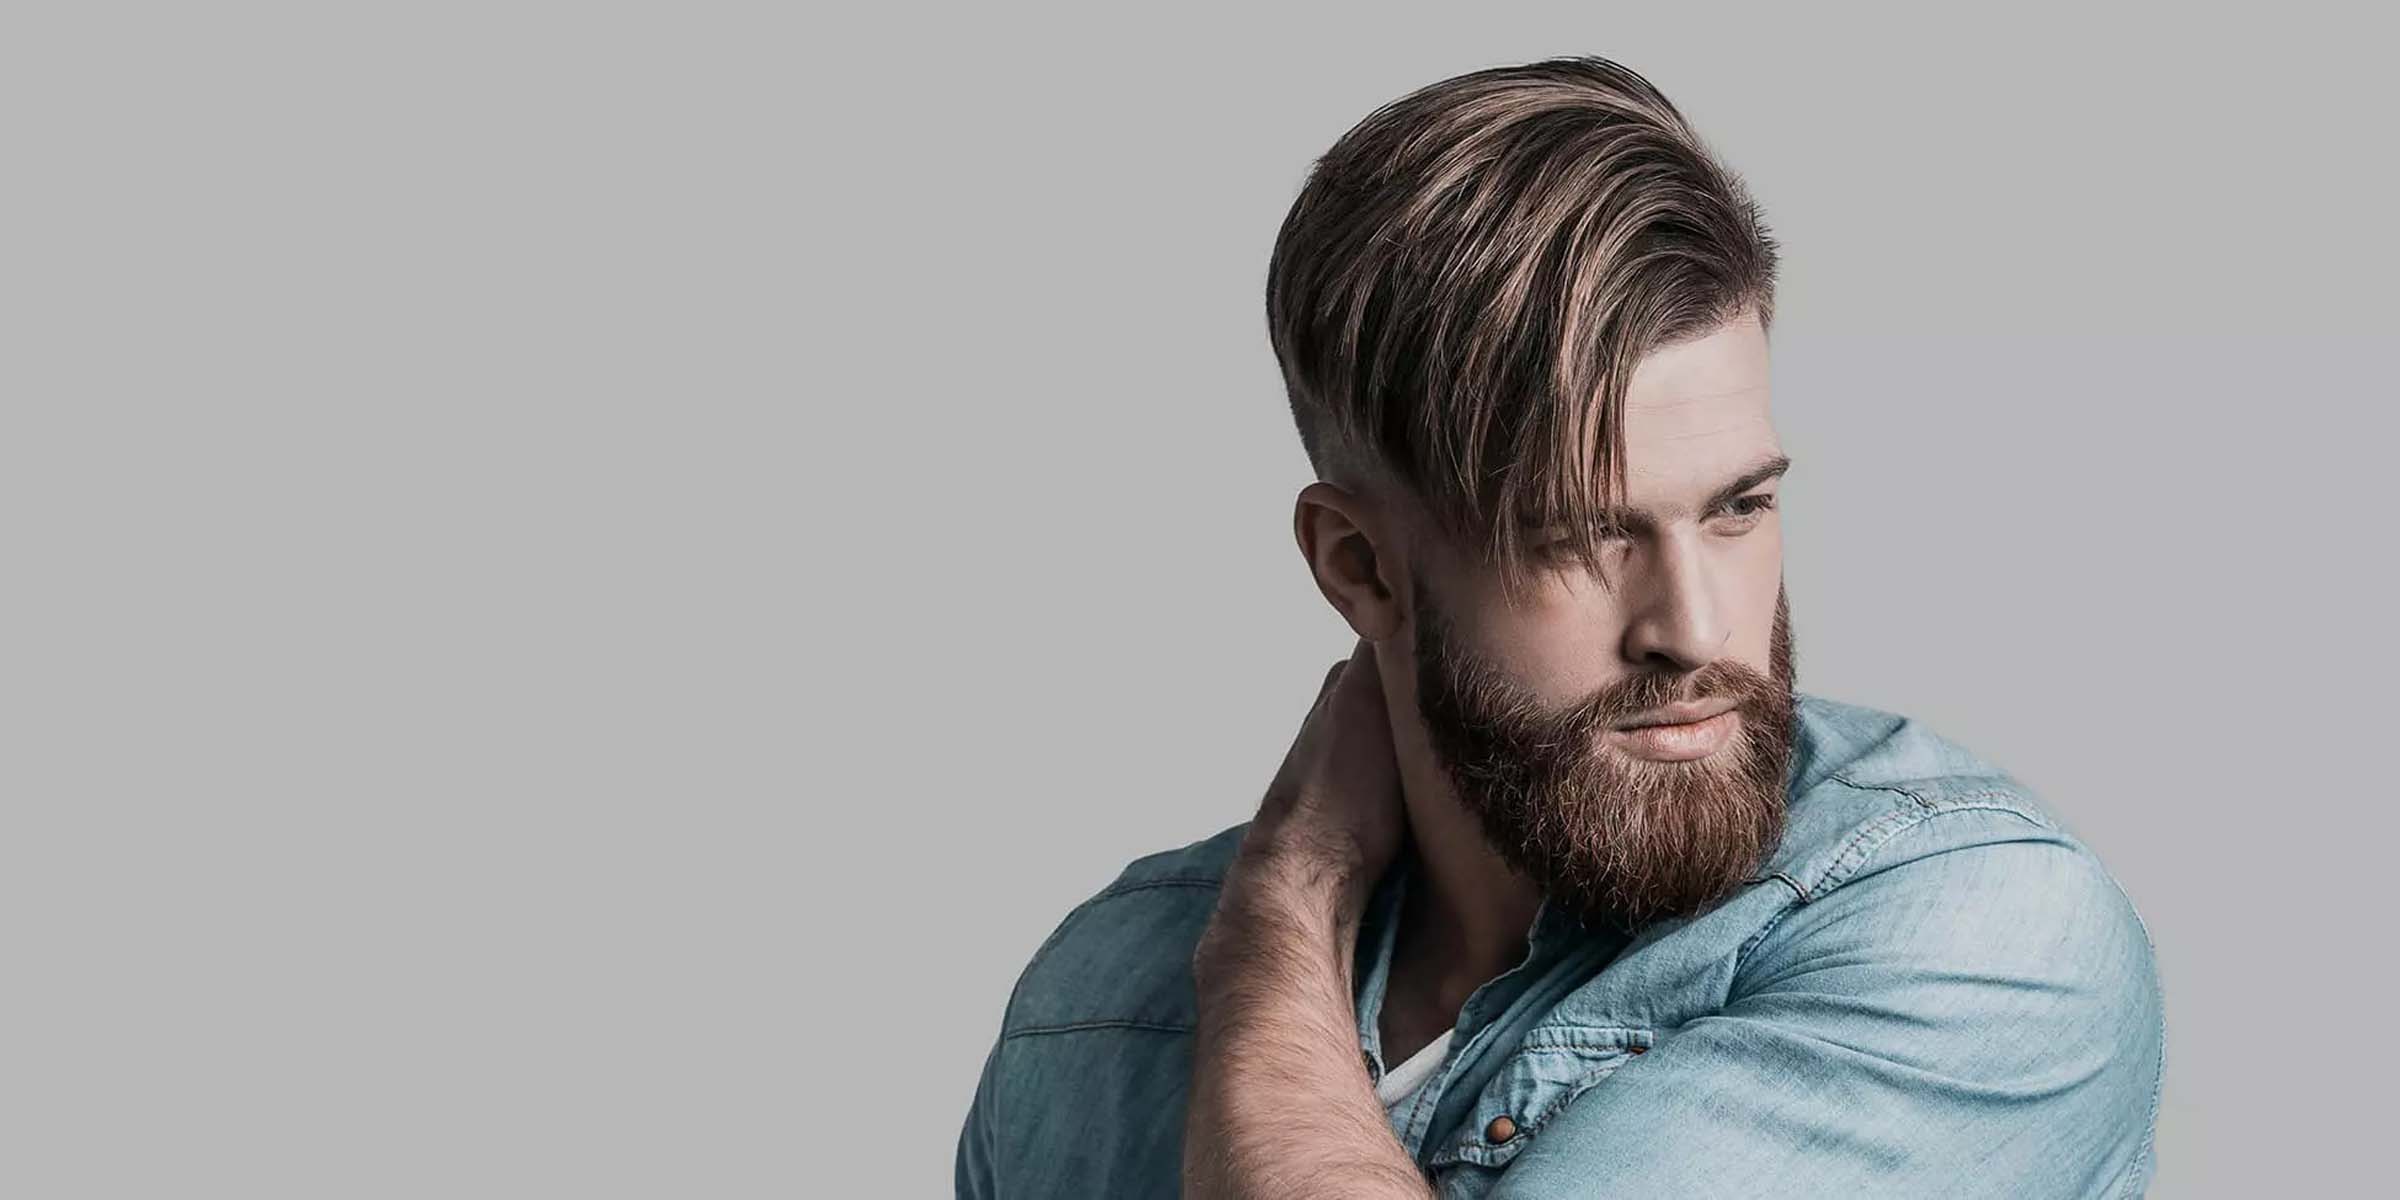 Discover 158+ hairstyles for men side cut